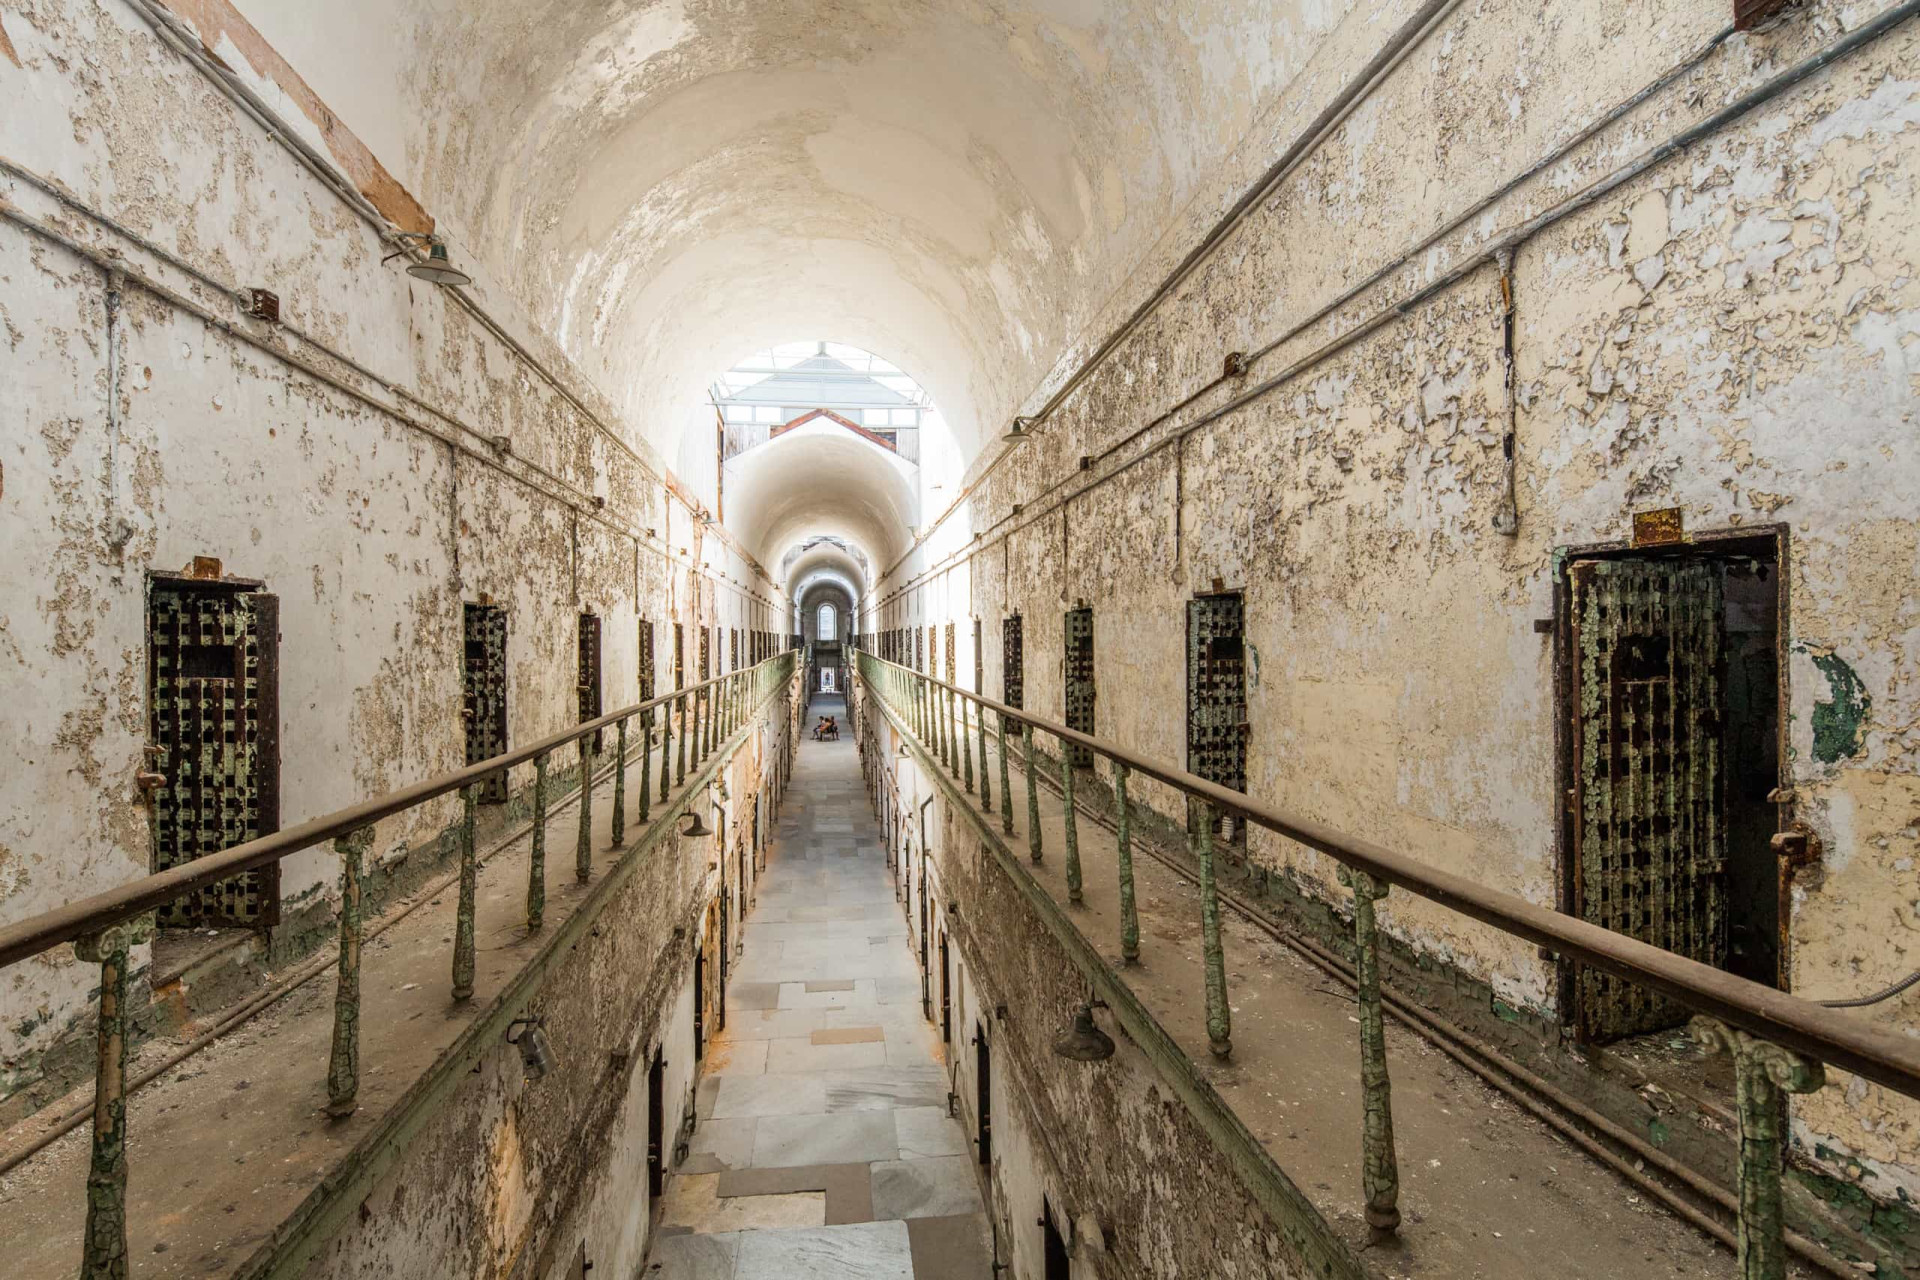 <p>Al Capone was just one of the notorious gangsters held at the Eastern State Penitentiary. Now a museum, visitors can wander the cell blocks unchecked and are free to leave any time they want.</p><p><a href="https://www.msn.com/en-us/community/channel/vid-7xx8mnucu55yw63we9va2gwr7uihbxwc68fxqp25x6tg4ftibpra?cvid=94631541bc0f4f89bfd59158d696ad7e">Follow us and access great exclusive content every day</a></p>